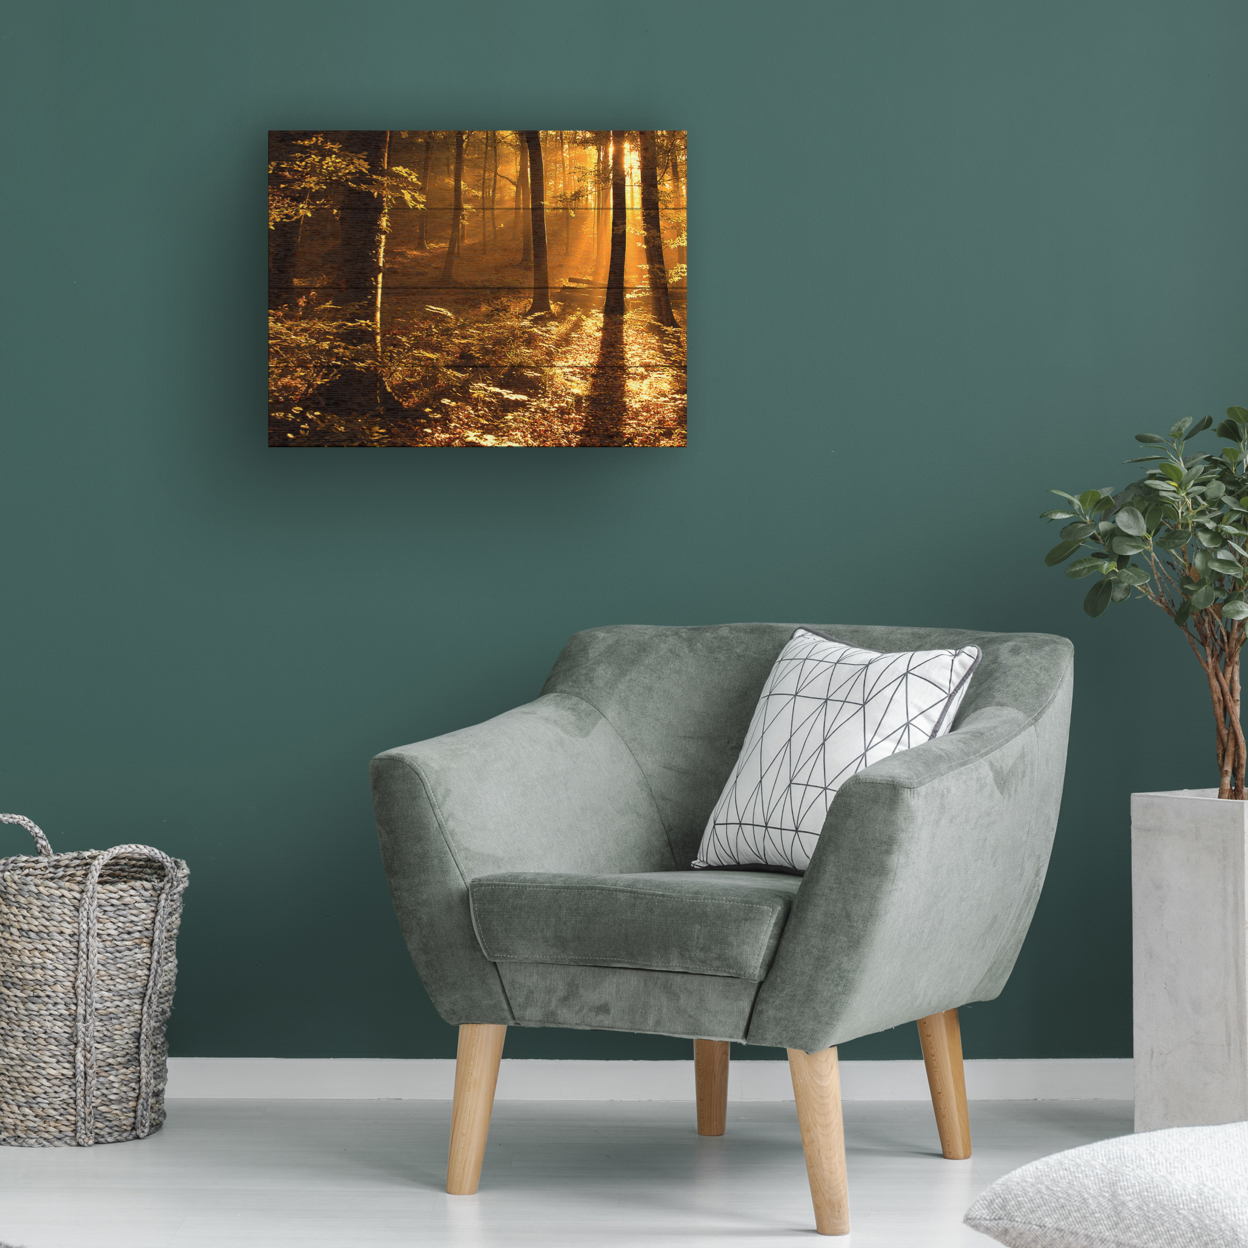 Wall Art 12 X 16 Inches Titled Morning Light Ready To Hang Printed On Wooden Planks